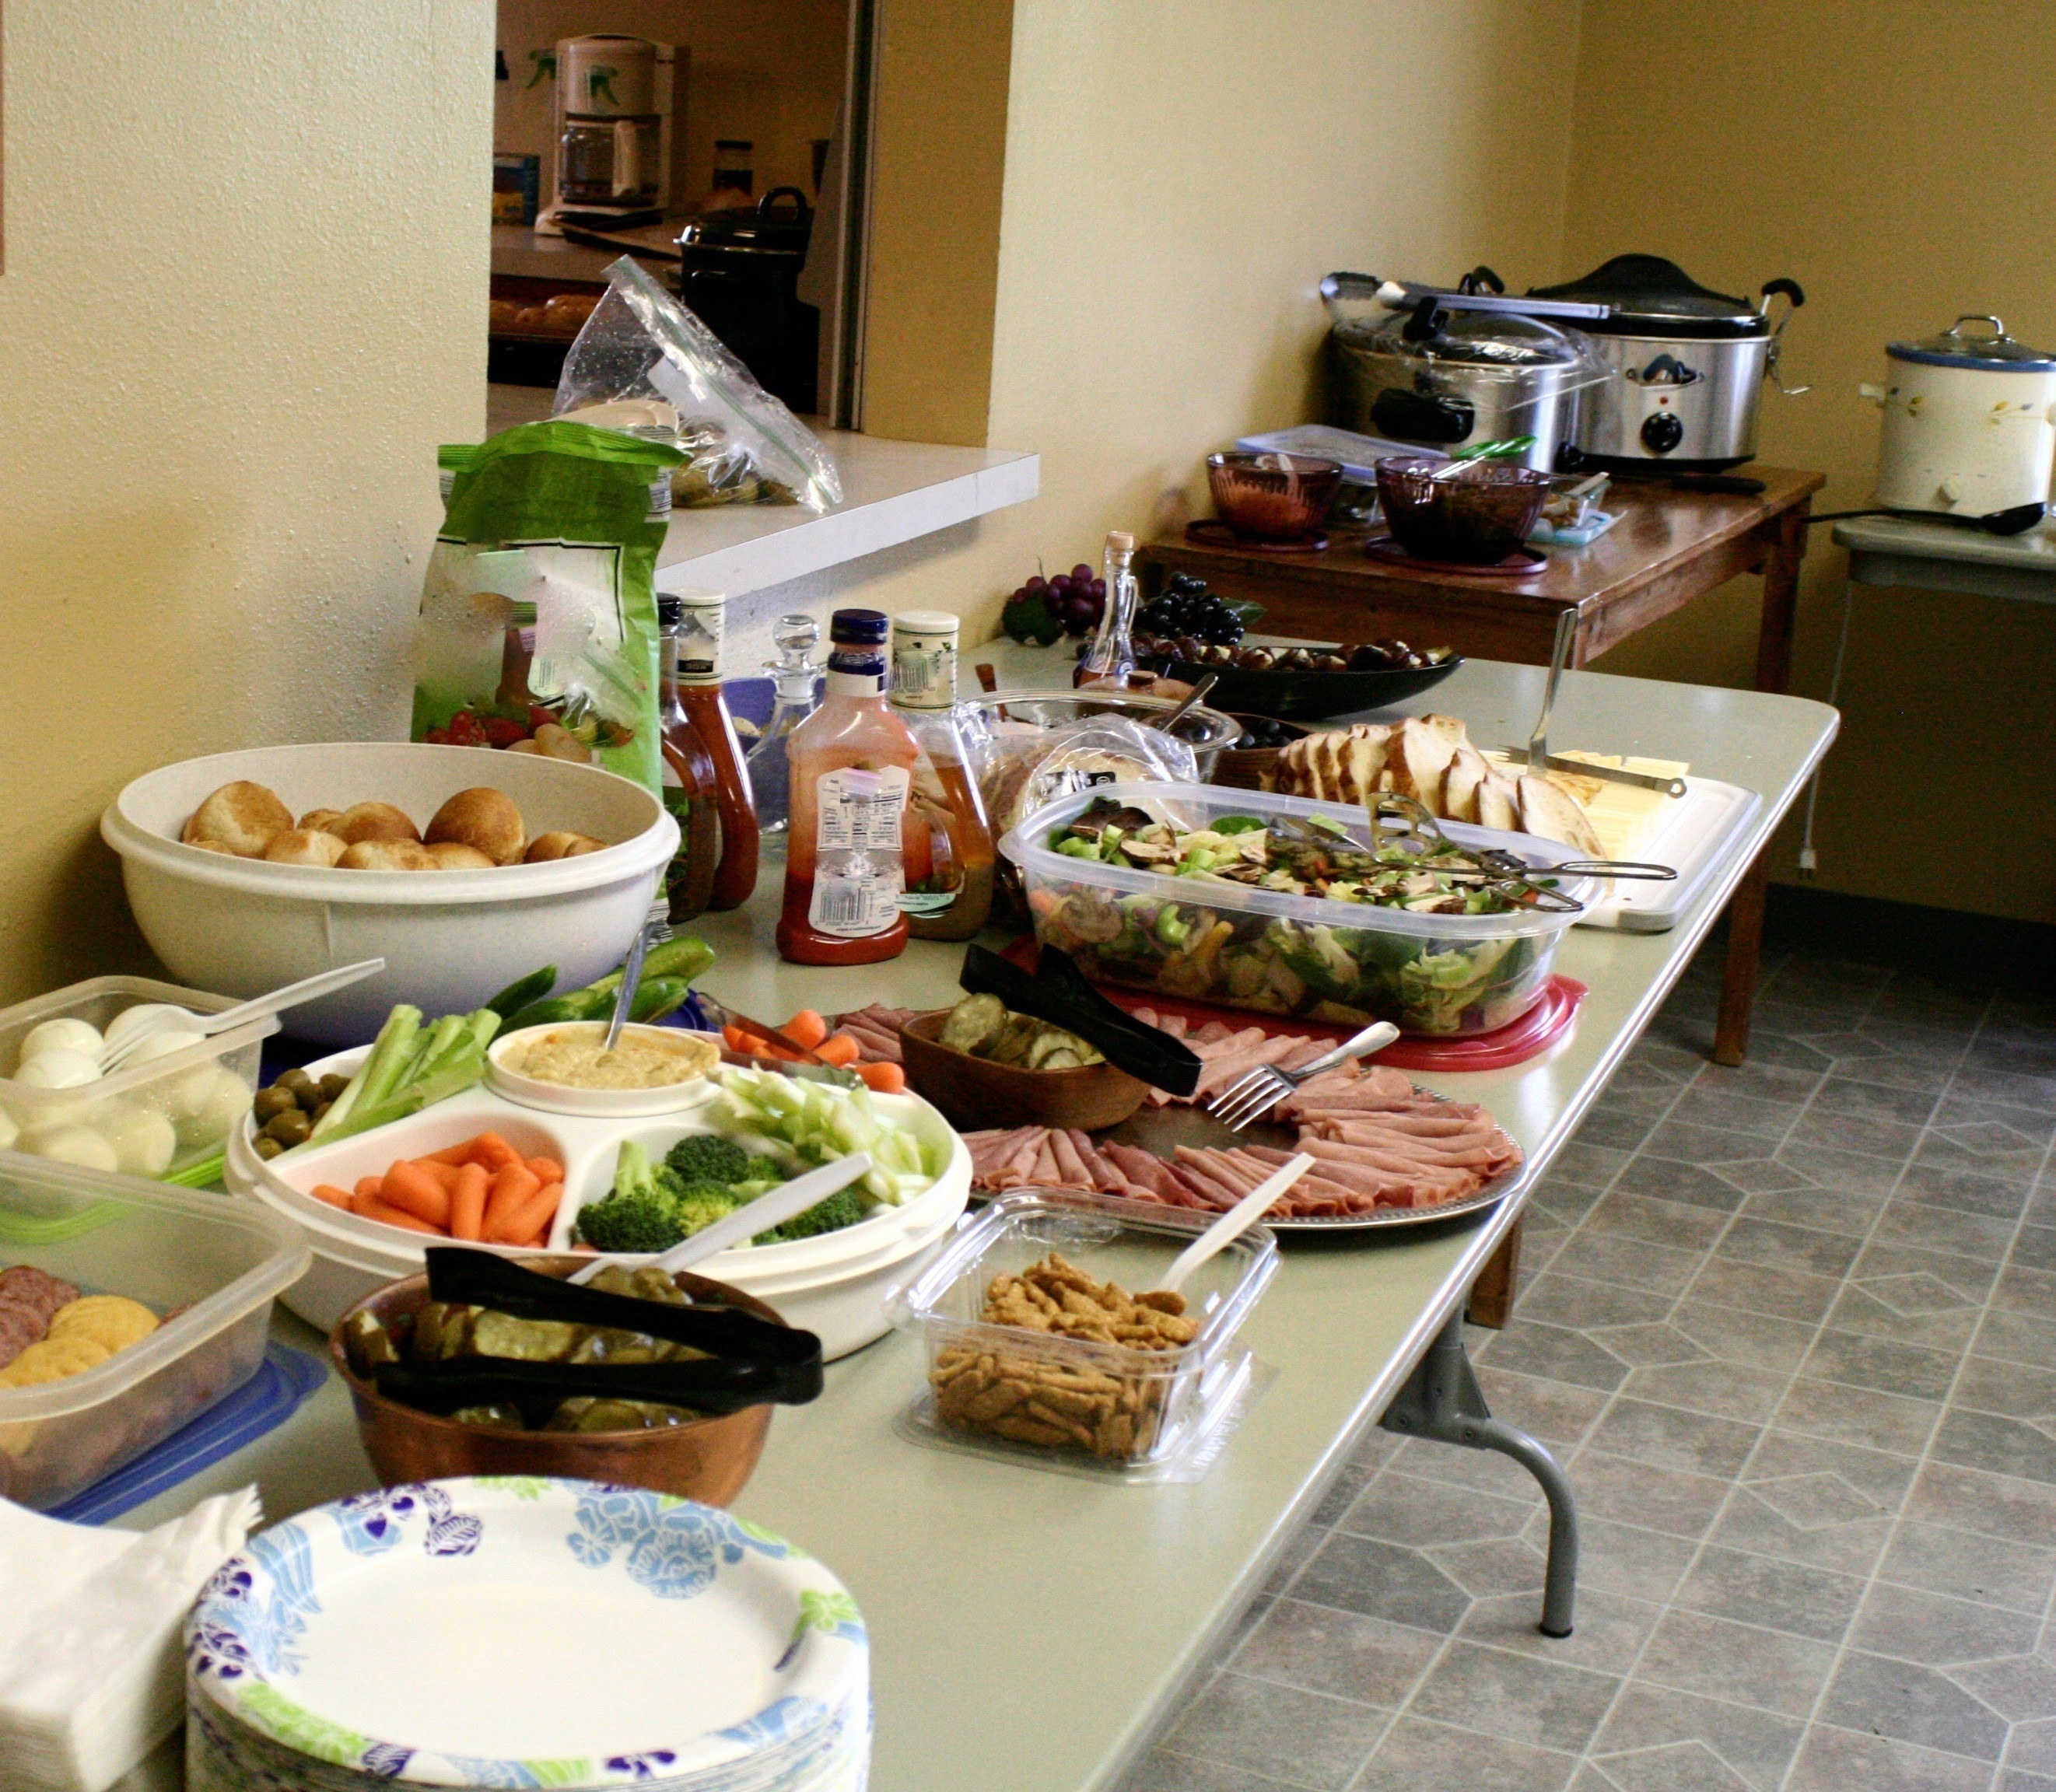 Potluck of a variety of different foods on a portable table.